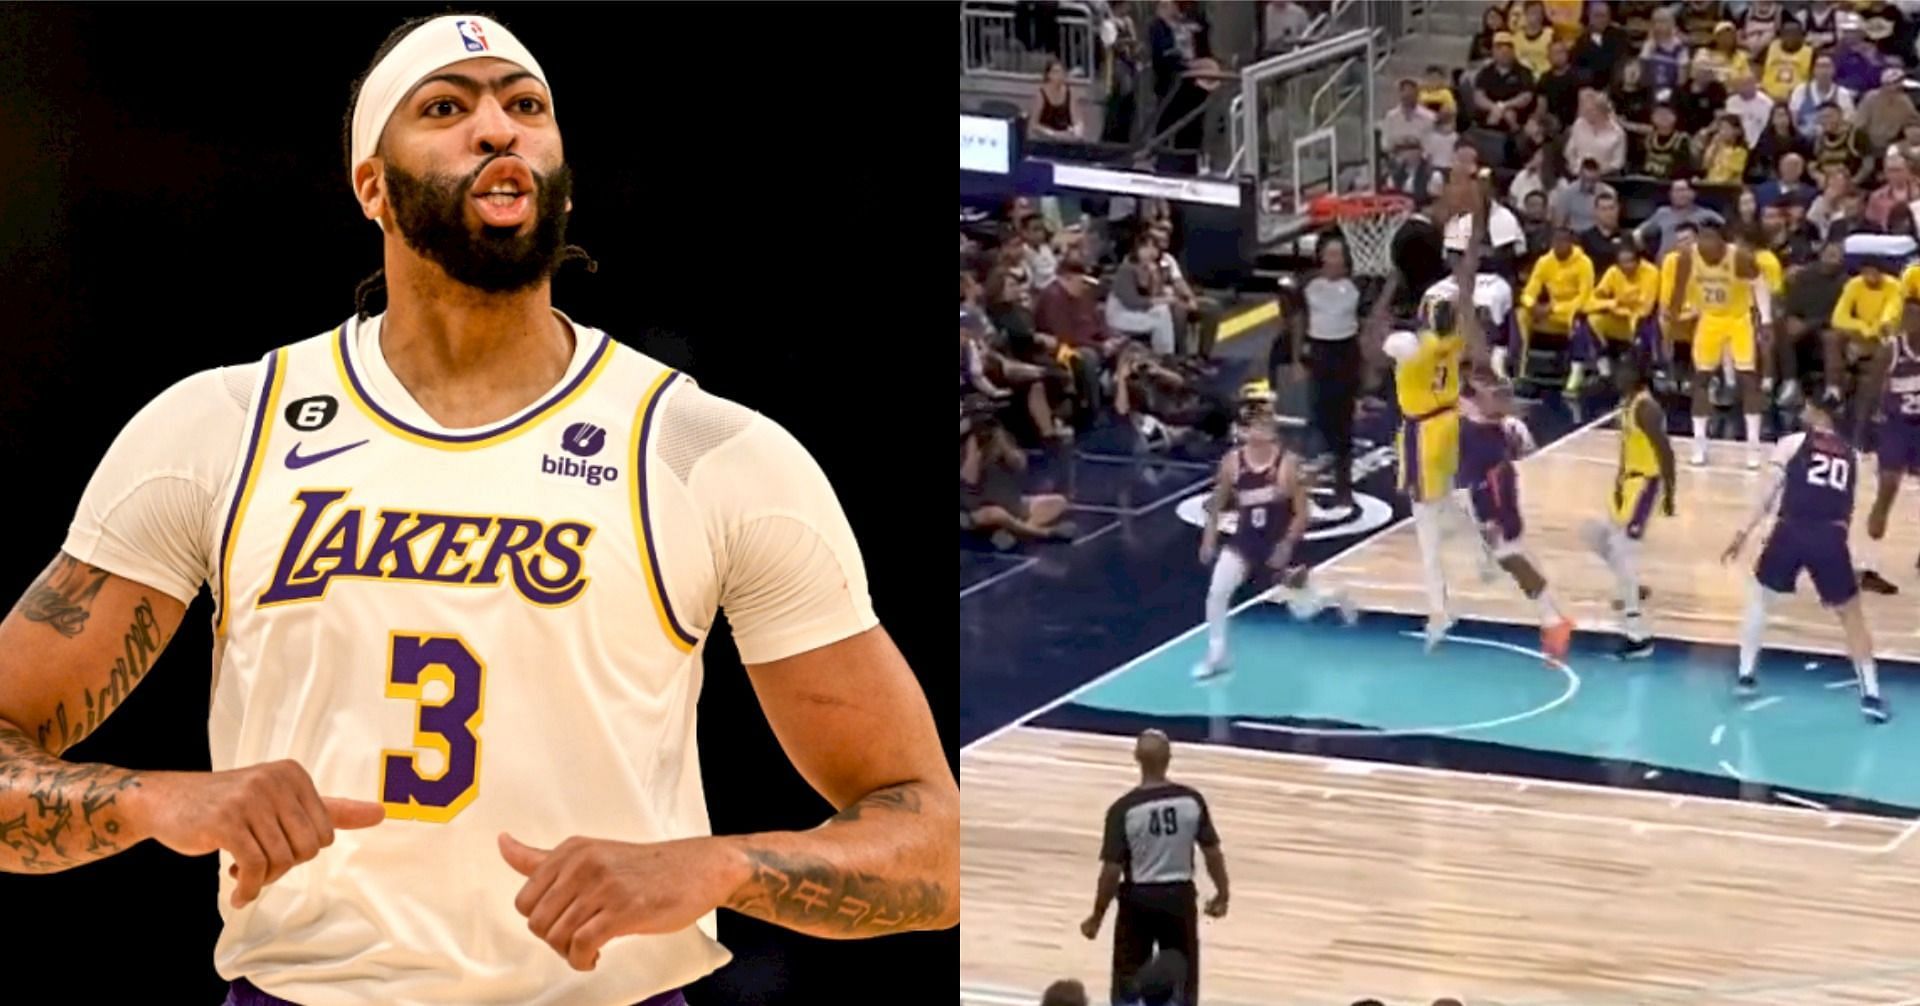 Anthony Davis throws down one-handed slam while drawing foul as Lakers go up by 6